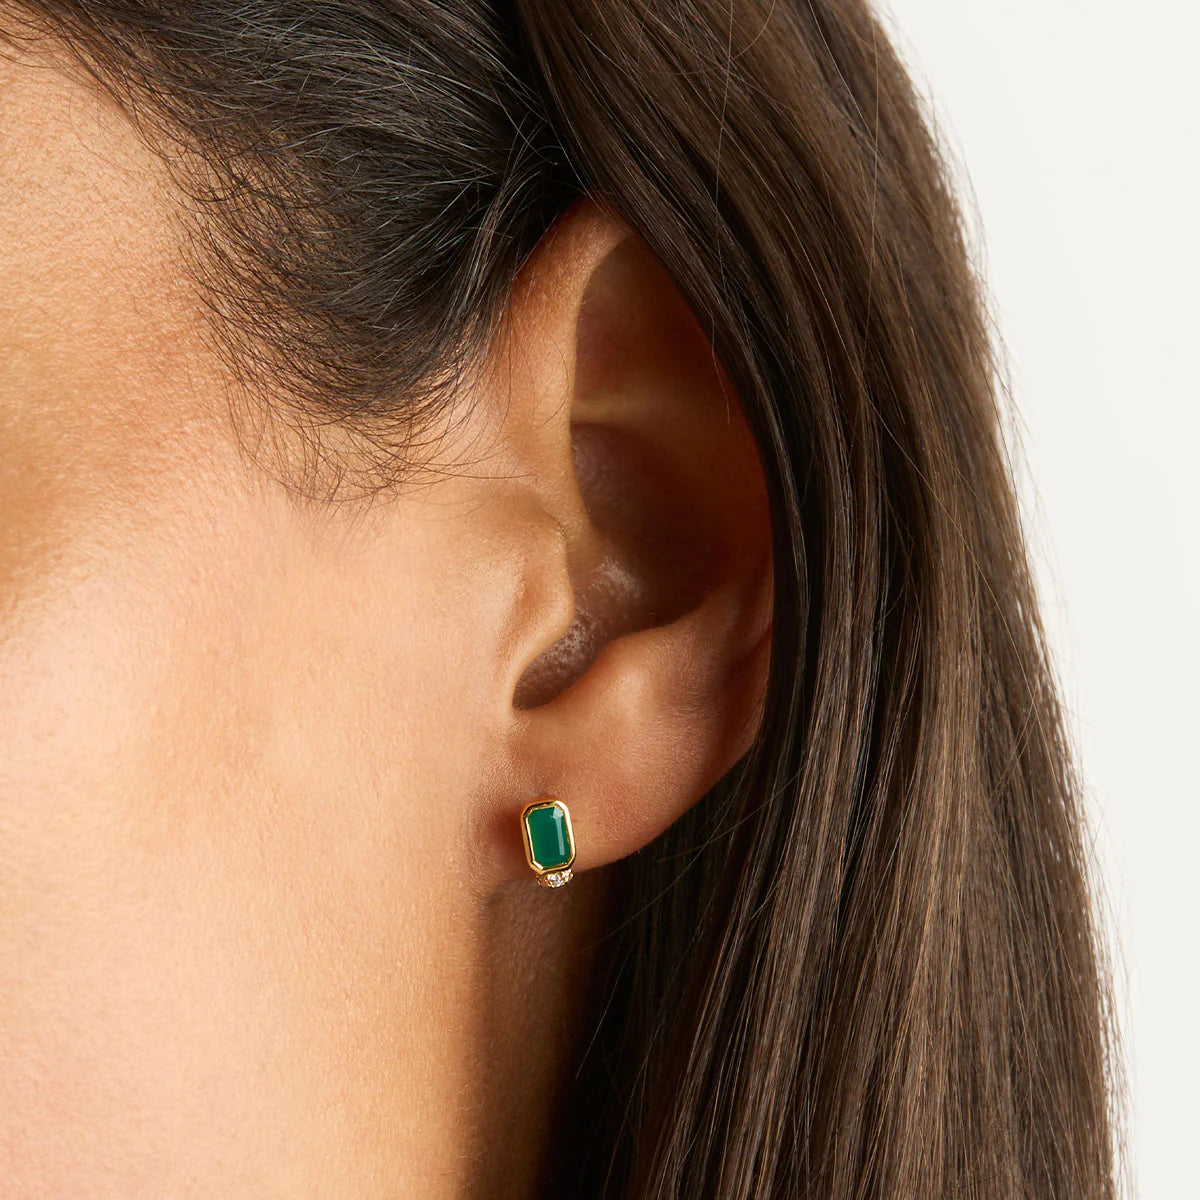 STRENGTH WITHIN STUD EARRINGS -18K GOLD VERMEIL - BY CHARLOTTE